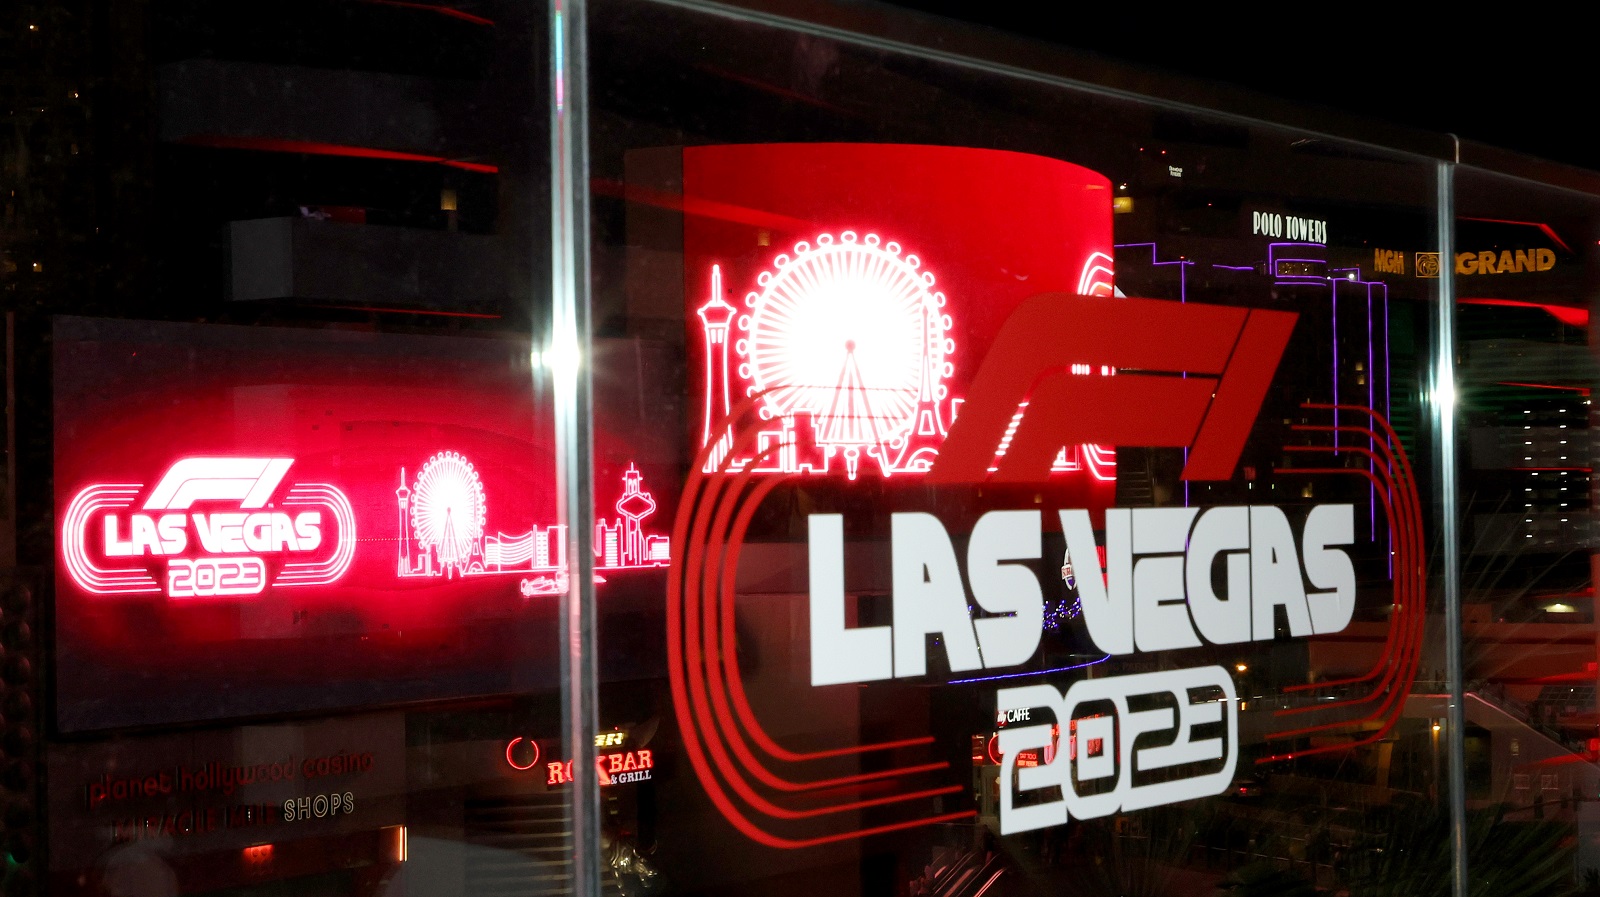 A decal of the Formula 1 Las Vegas Race 2023 is shown with digital signs on the Las Vegas Strip displaying the race logo during the announcement on March 30, 2022.